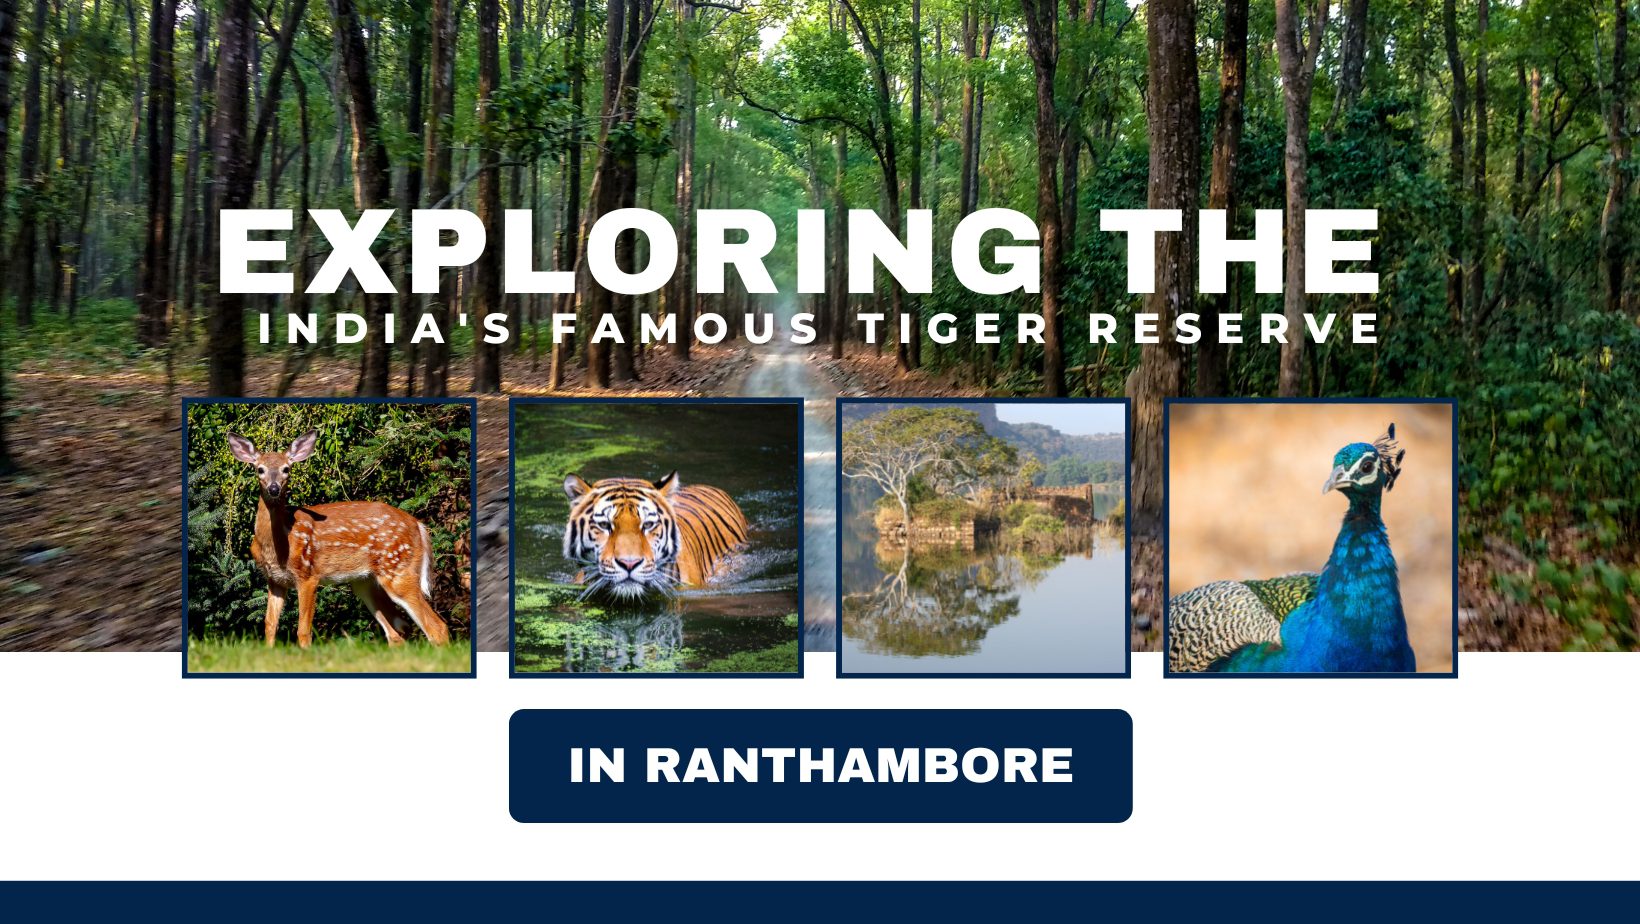 Exploring the India’s Famous Tiger Reserve in Ranthambore